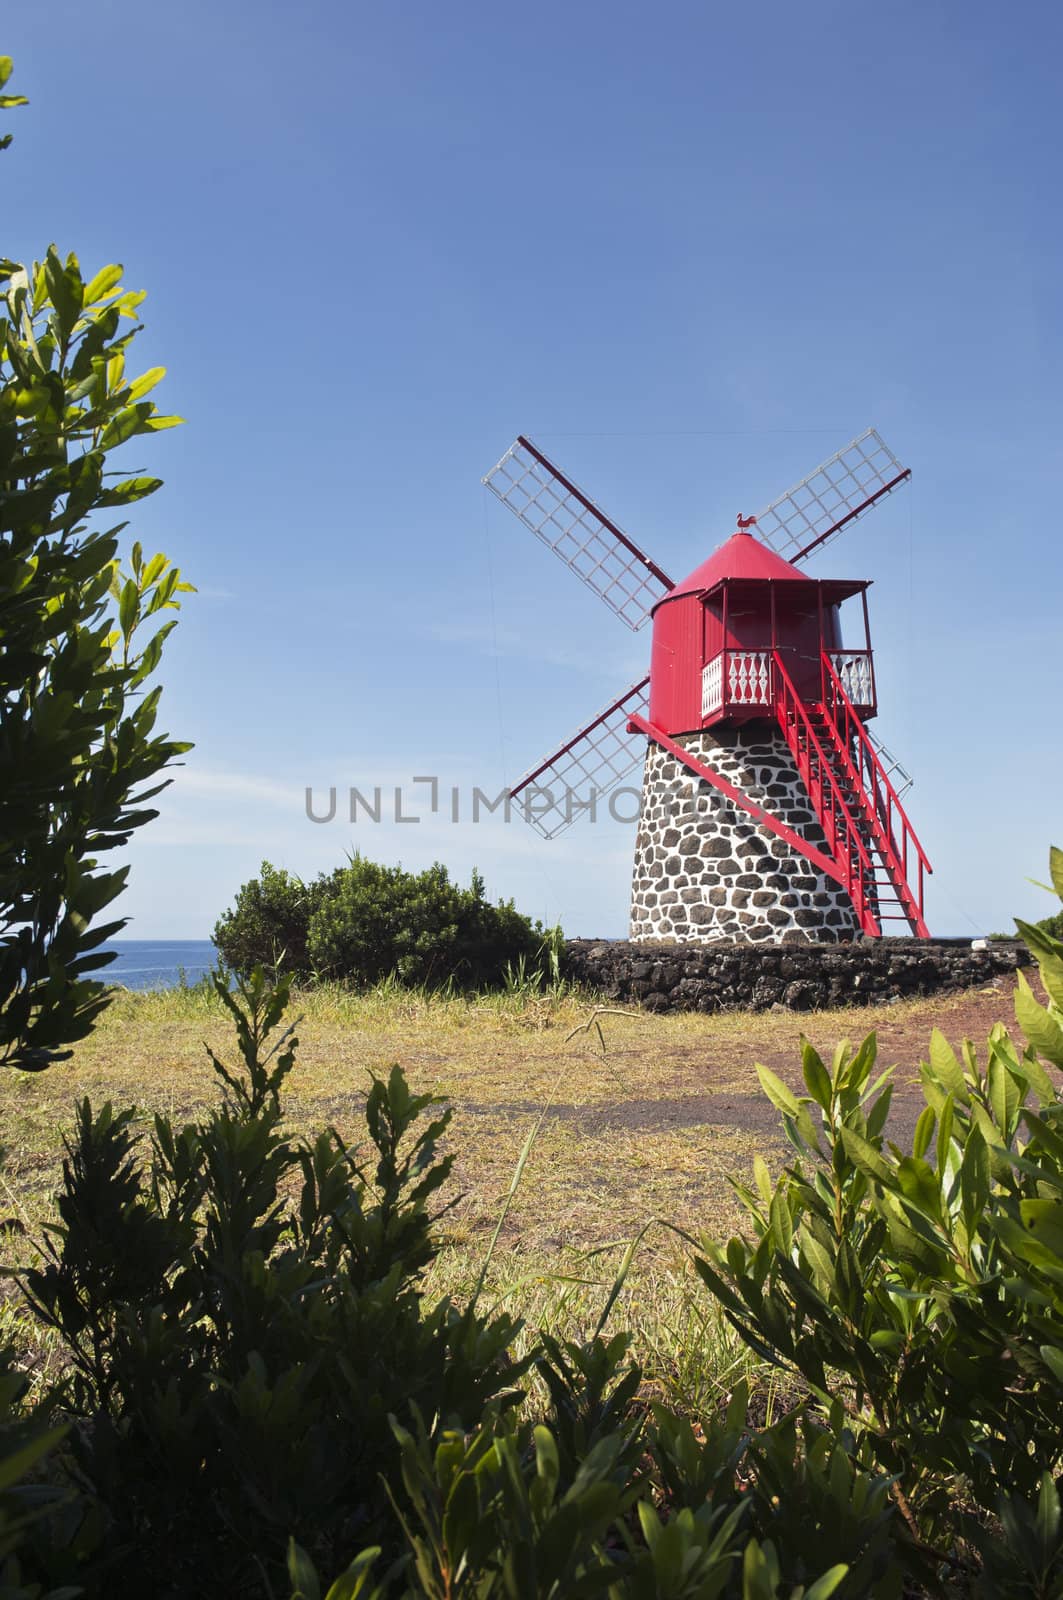 Red windmill in the coast of Pico island, Azores